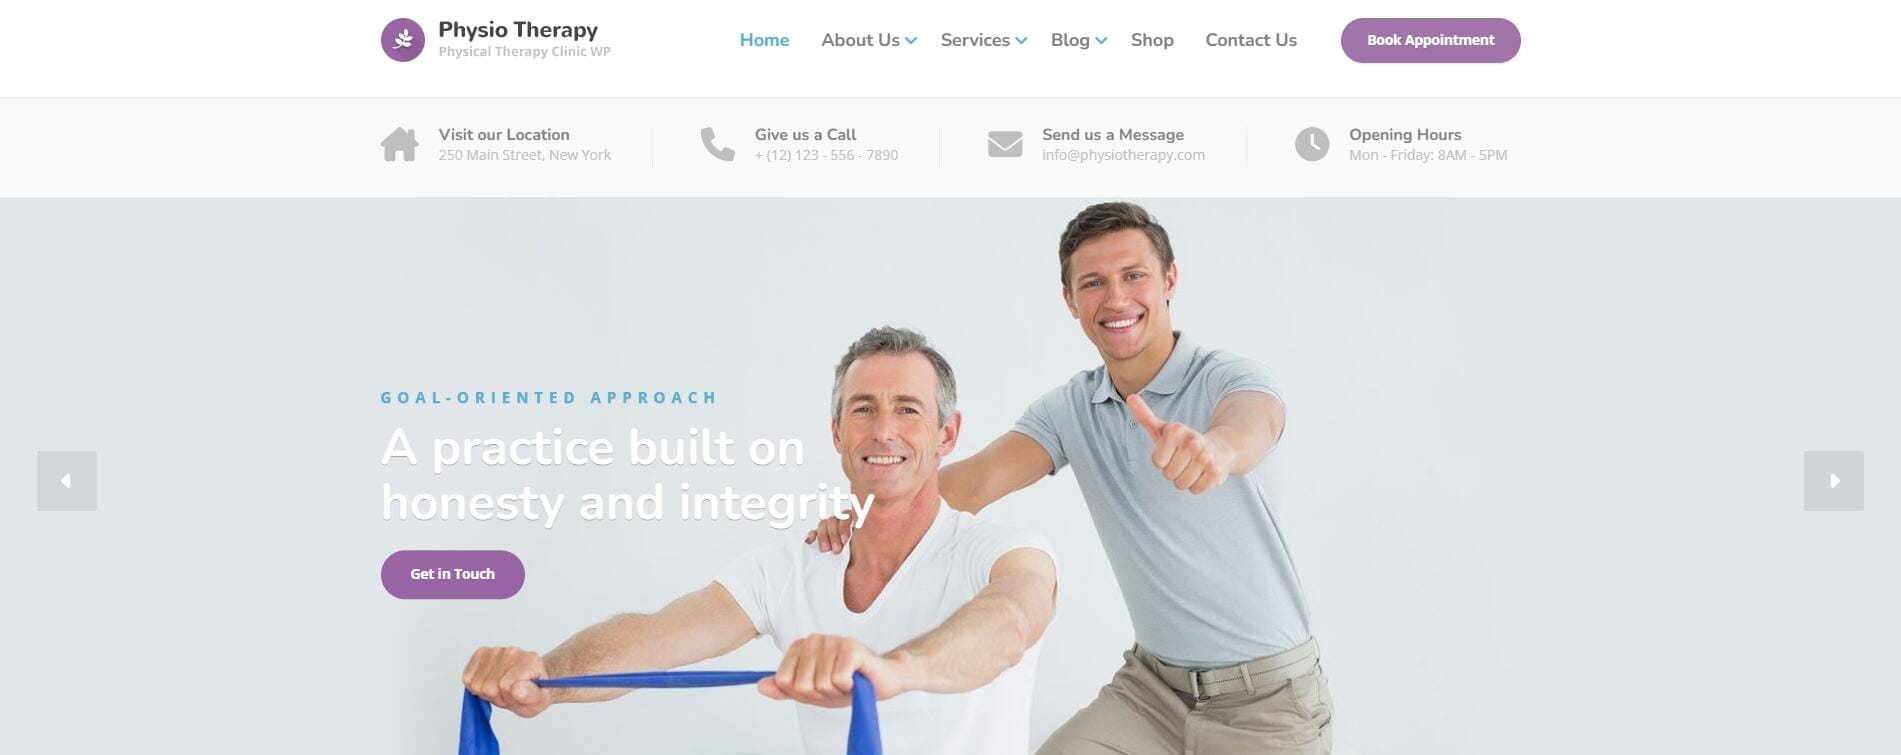 Physical therapy website template named Physio